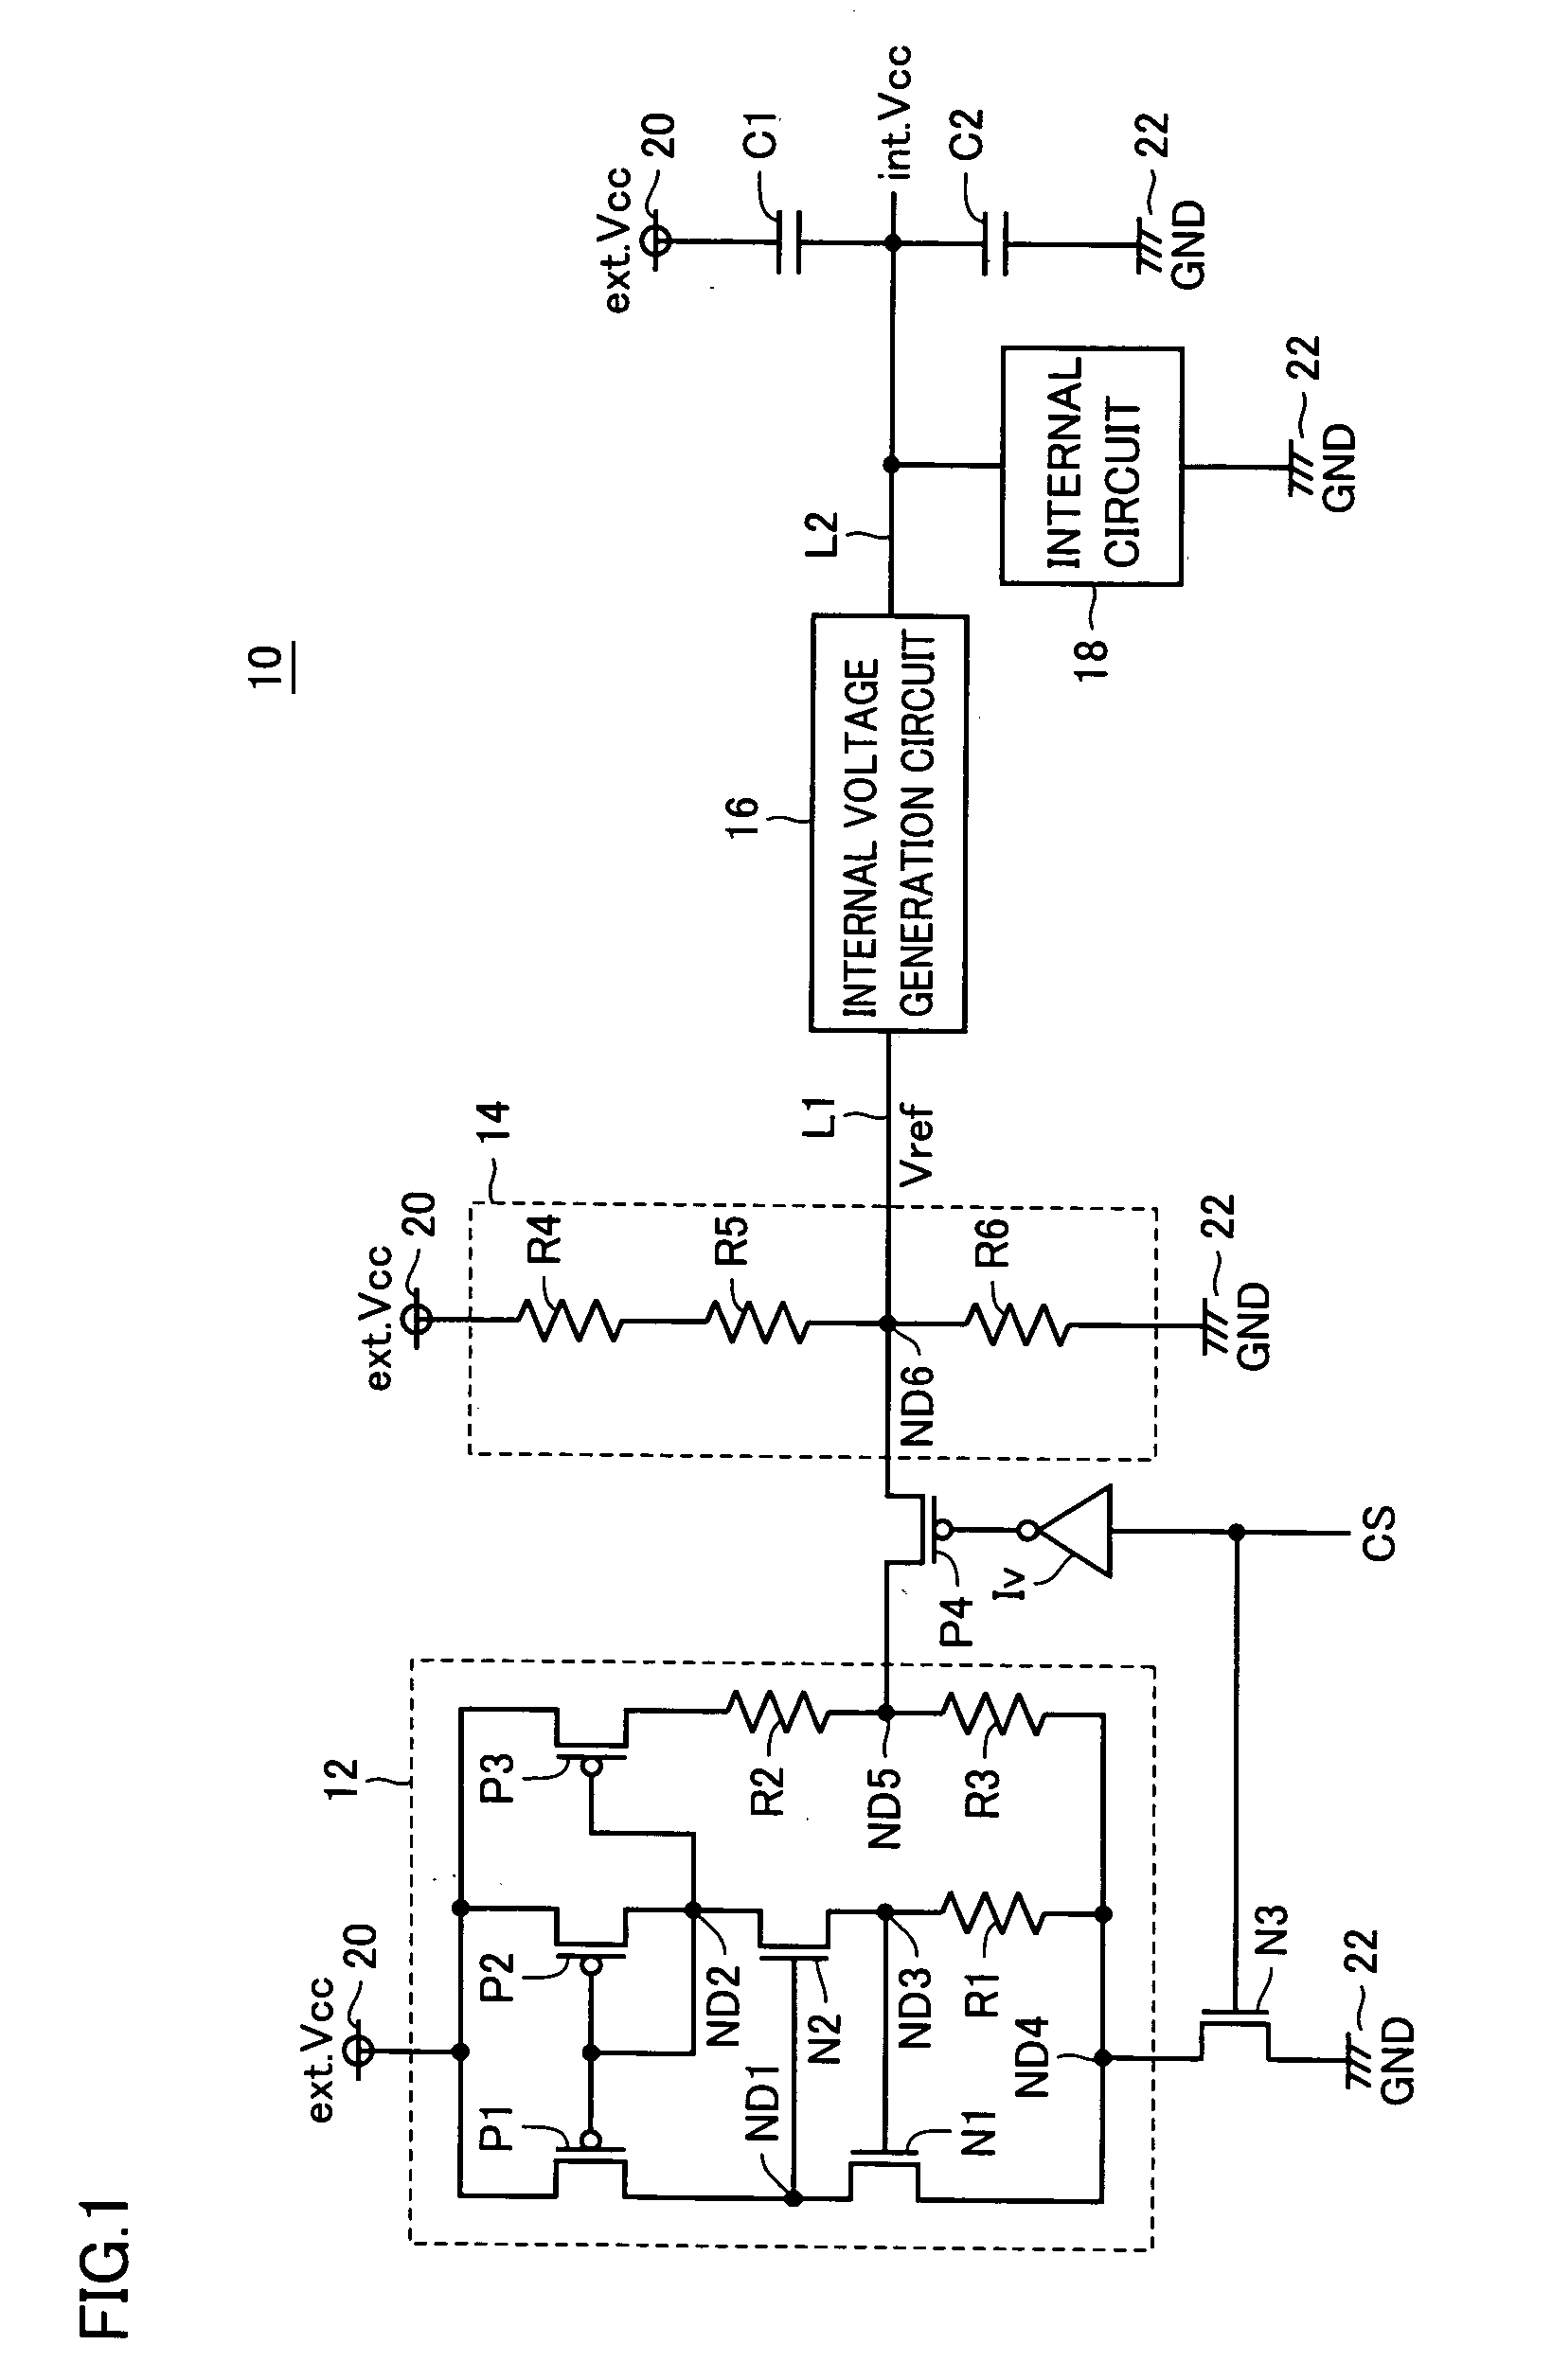 Semiconductor device including reference voltage generation circuit attaining reduced current consumption during stand-by